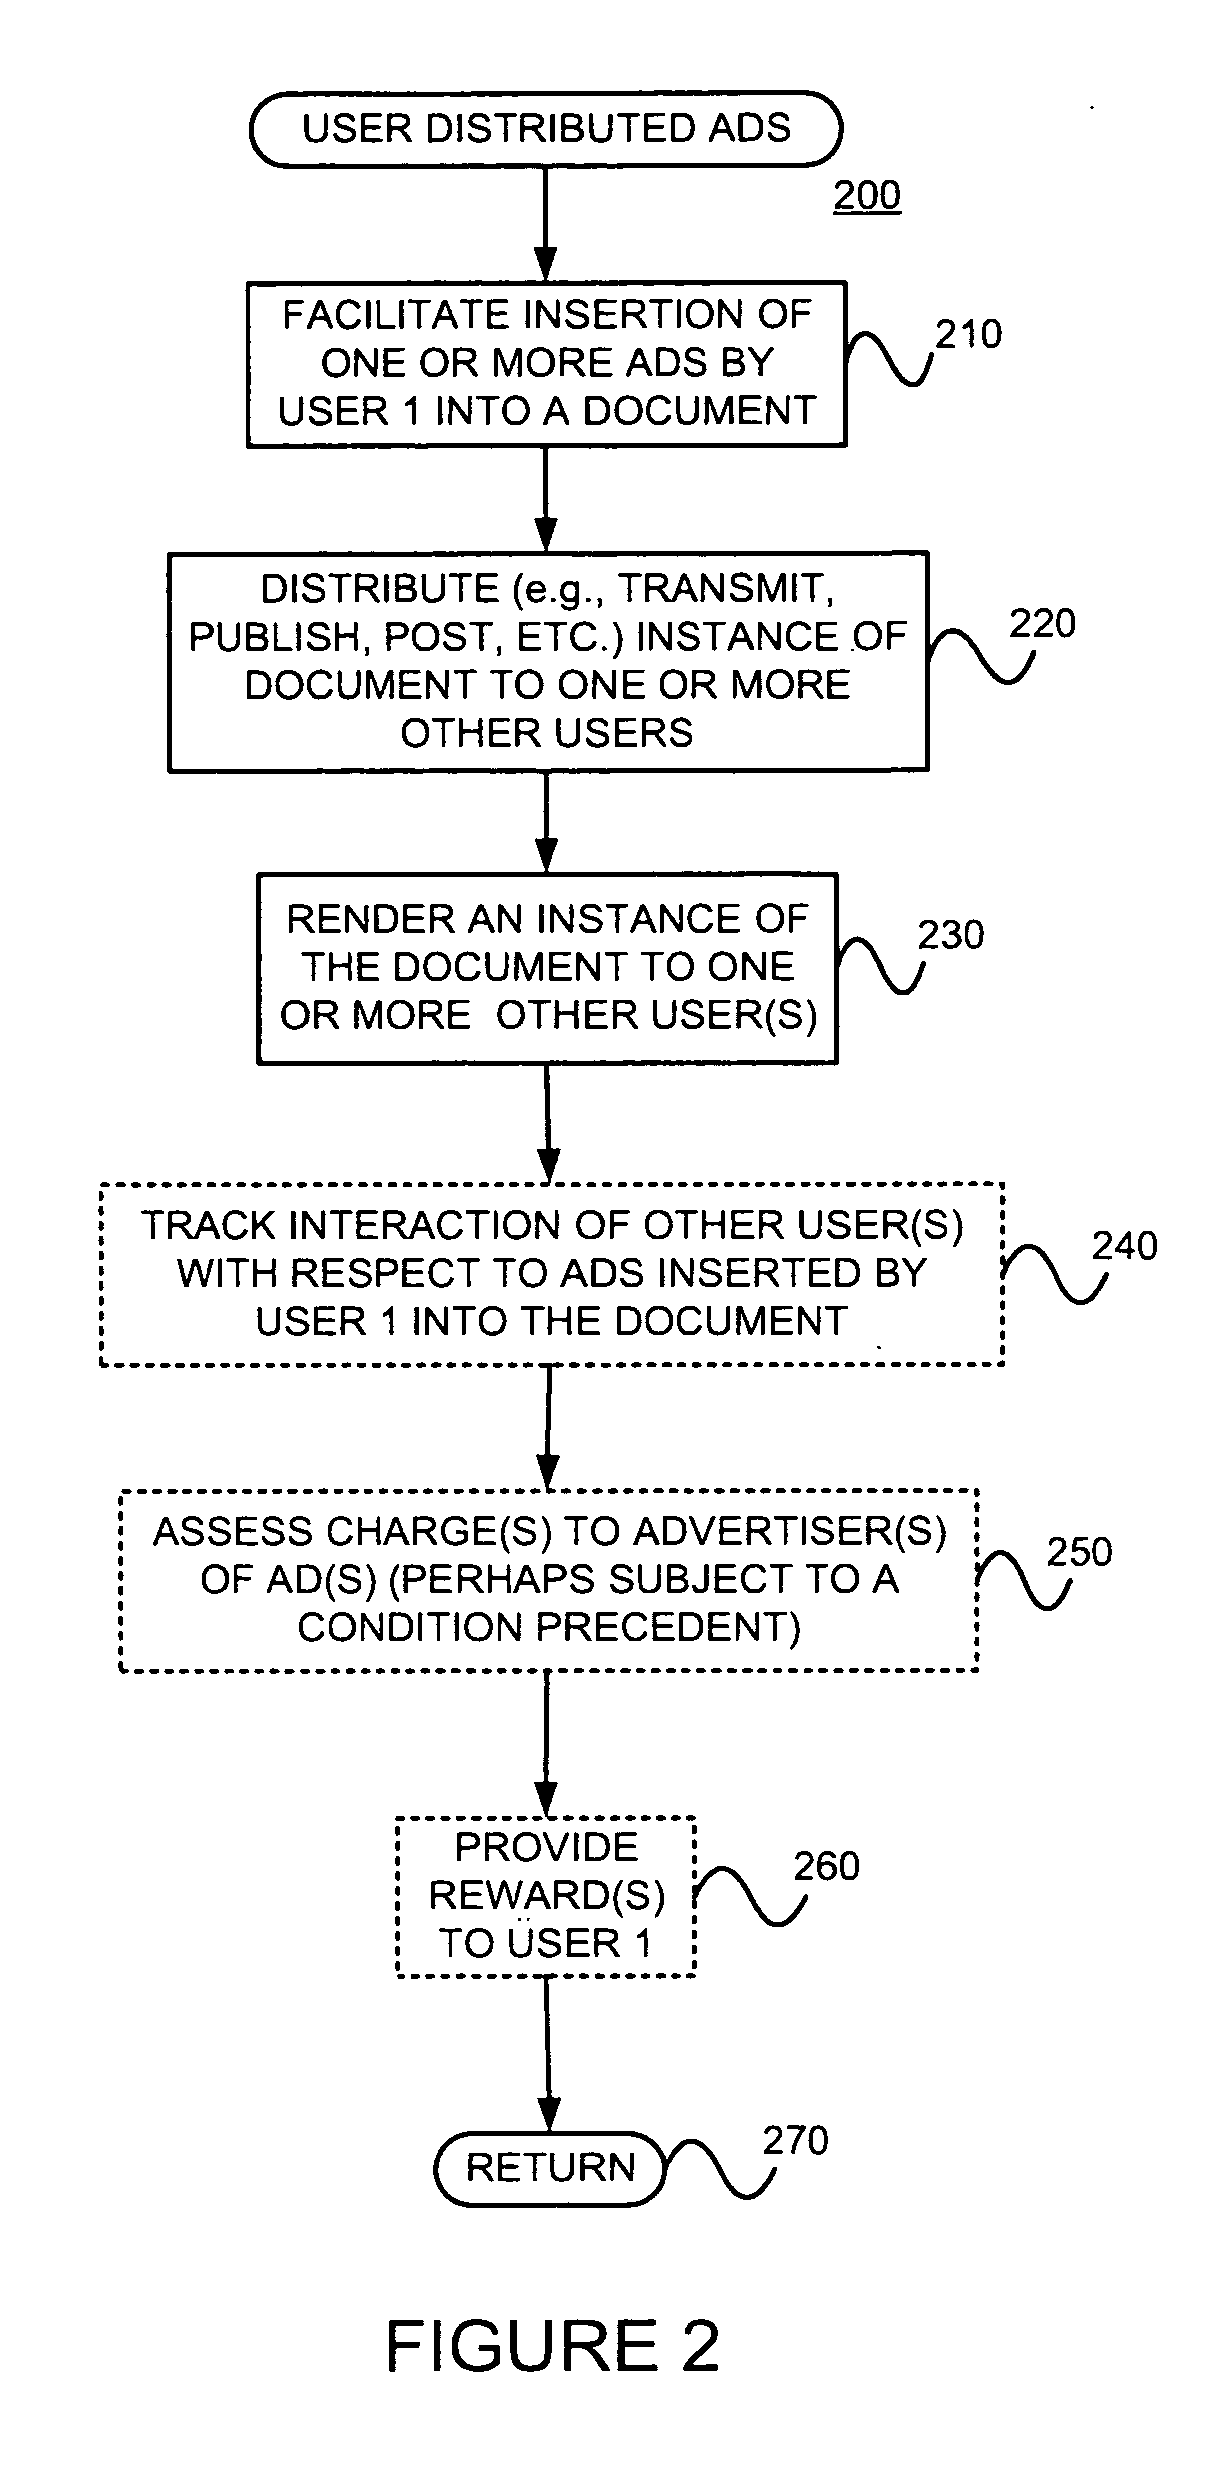 Facilitating manual user selection of one or more ads for insertion into a document to be made available to another user or users